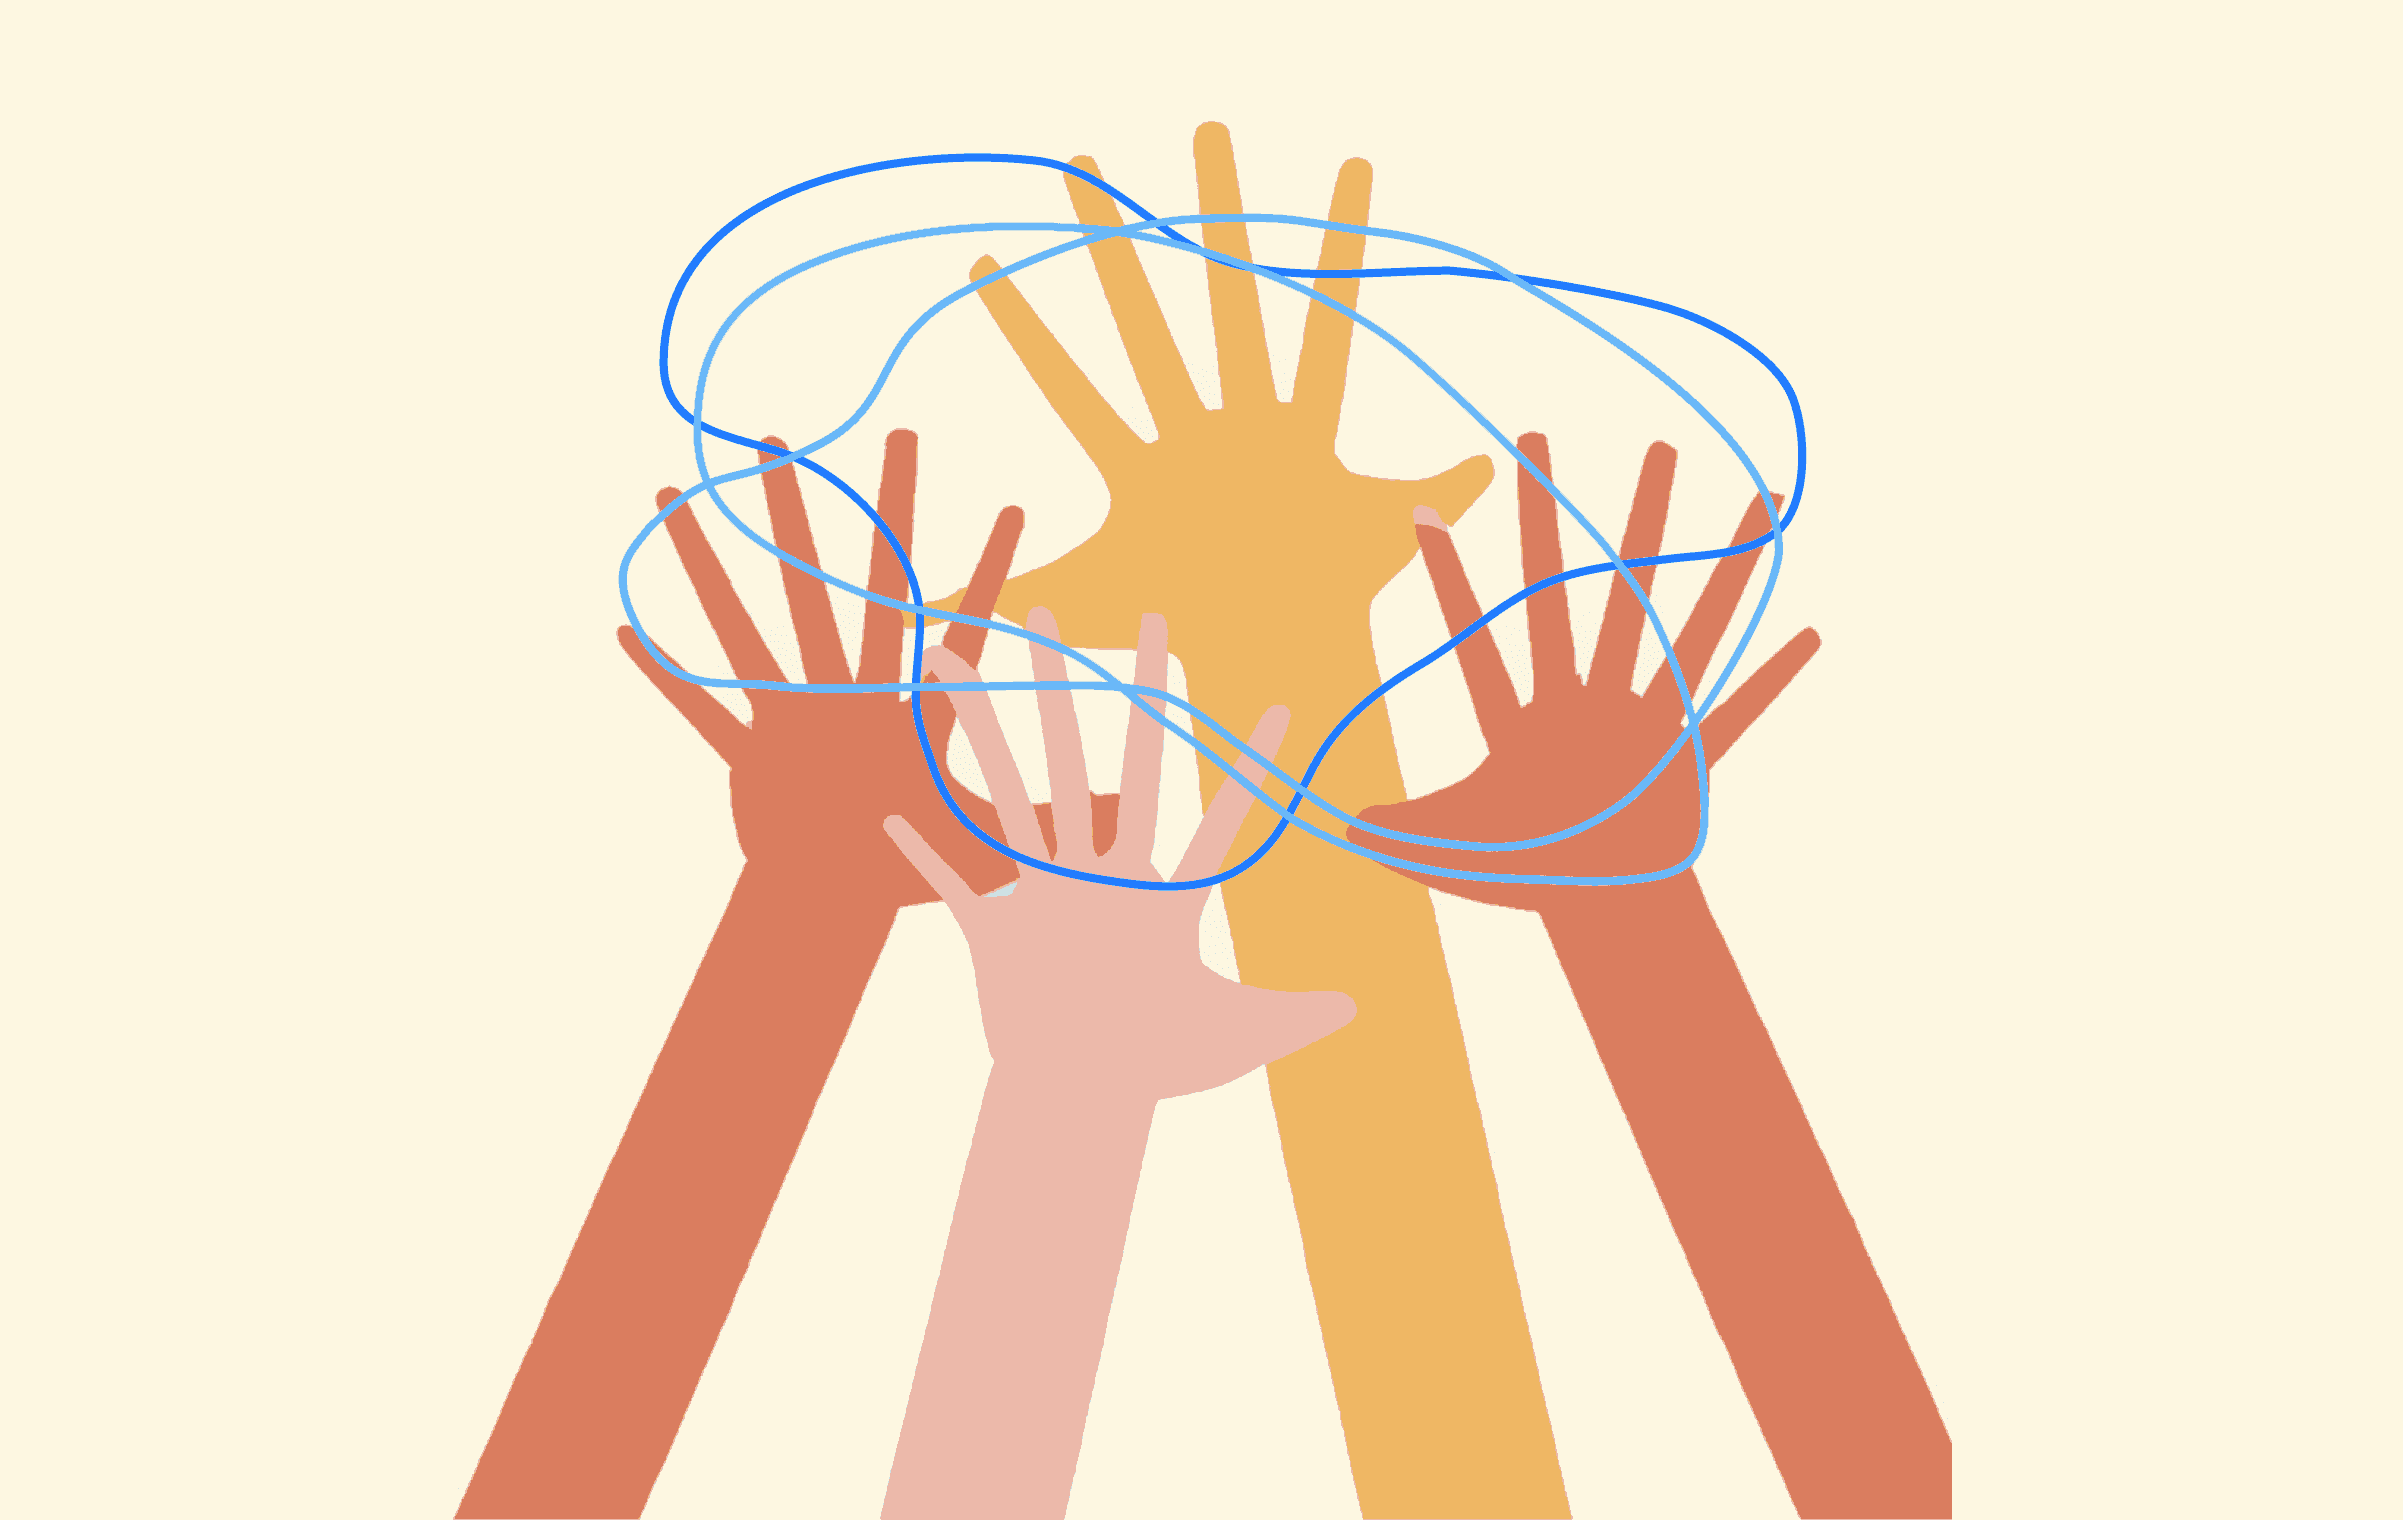 A sketch of several hands raised in the sky creating a concept